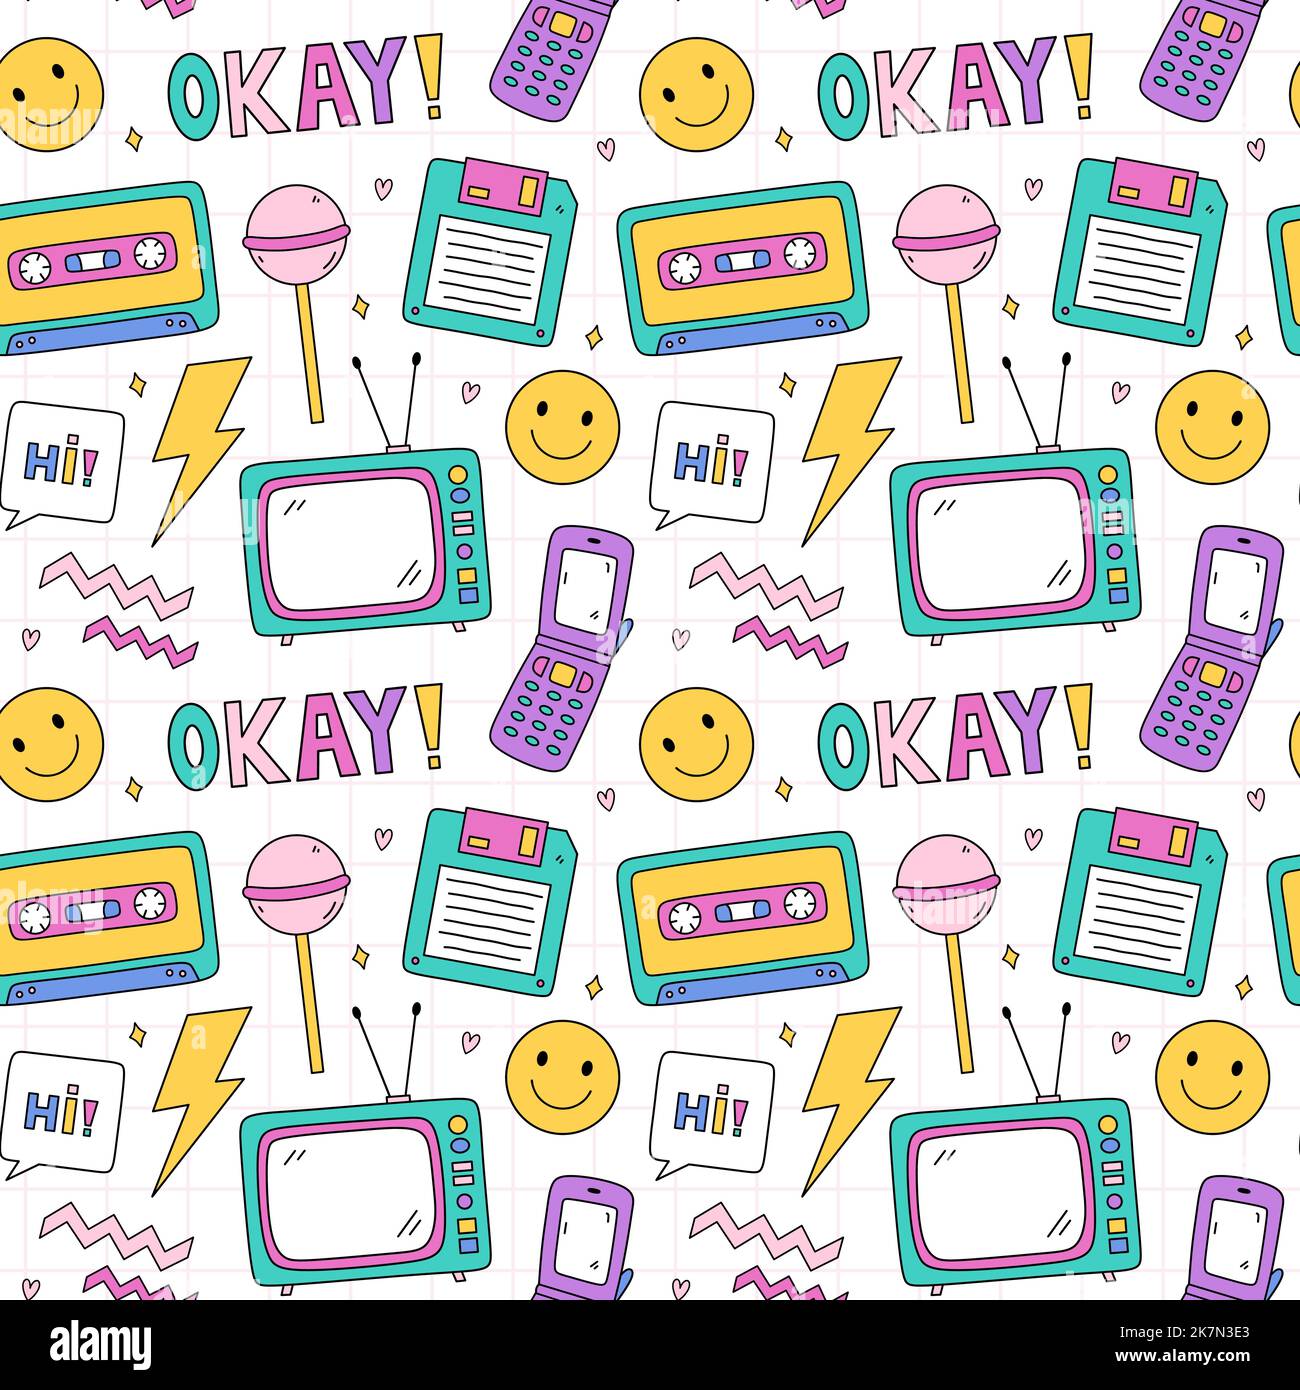 Bright seamless pattern with items from the nineties - retro flip phone, floppy disk, tv, smile, chupa chups and lightnings on checkered background. Nostalgia for the 1990s. Funny print. Stock Vector